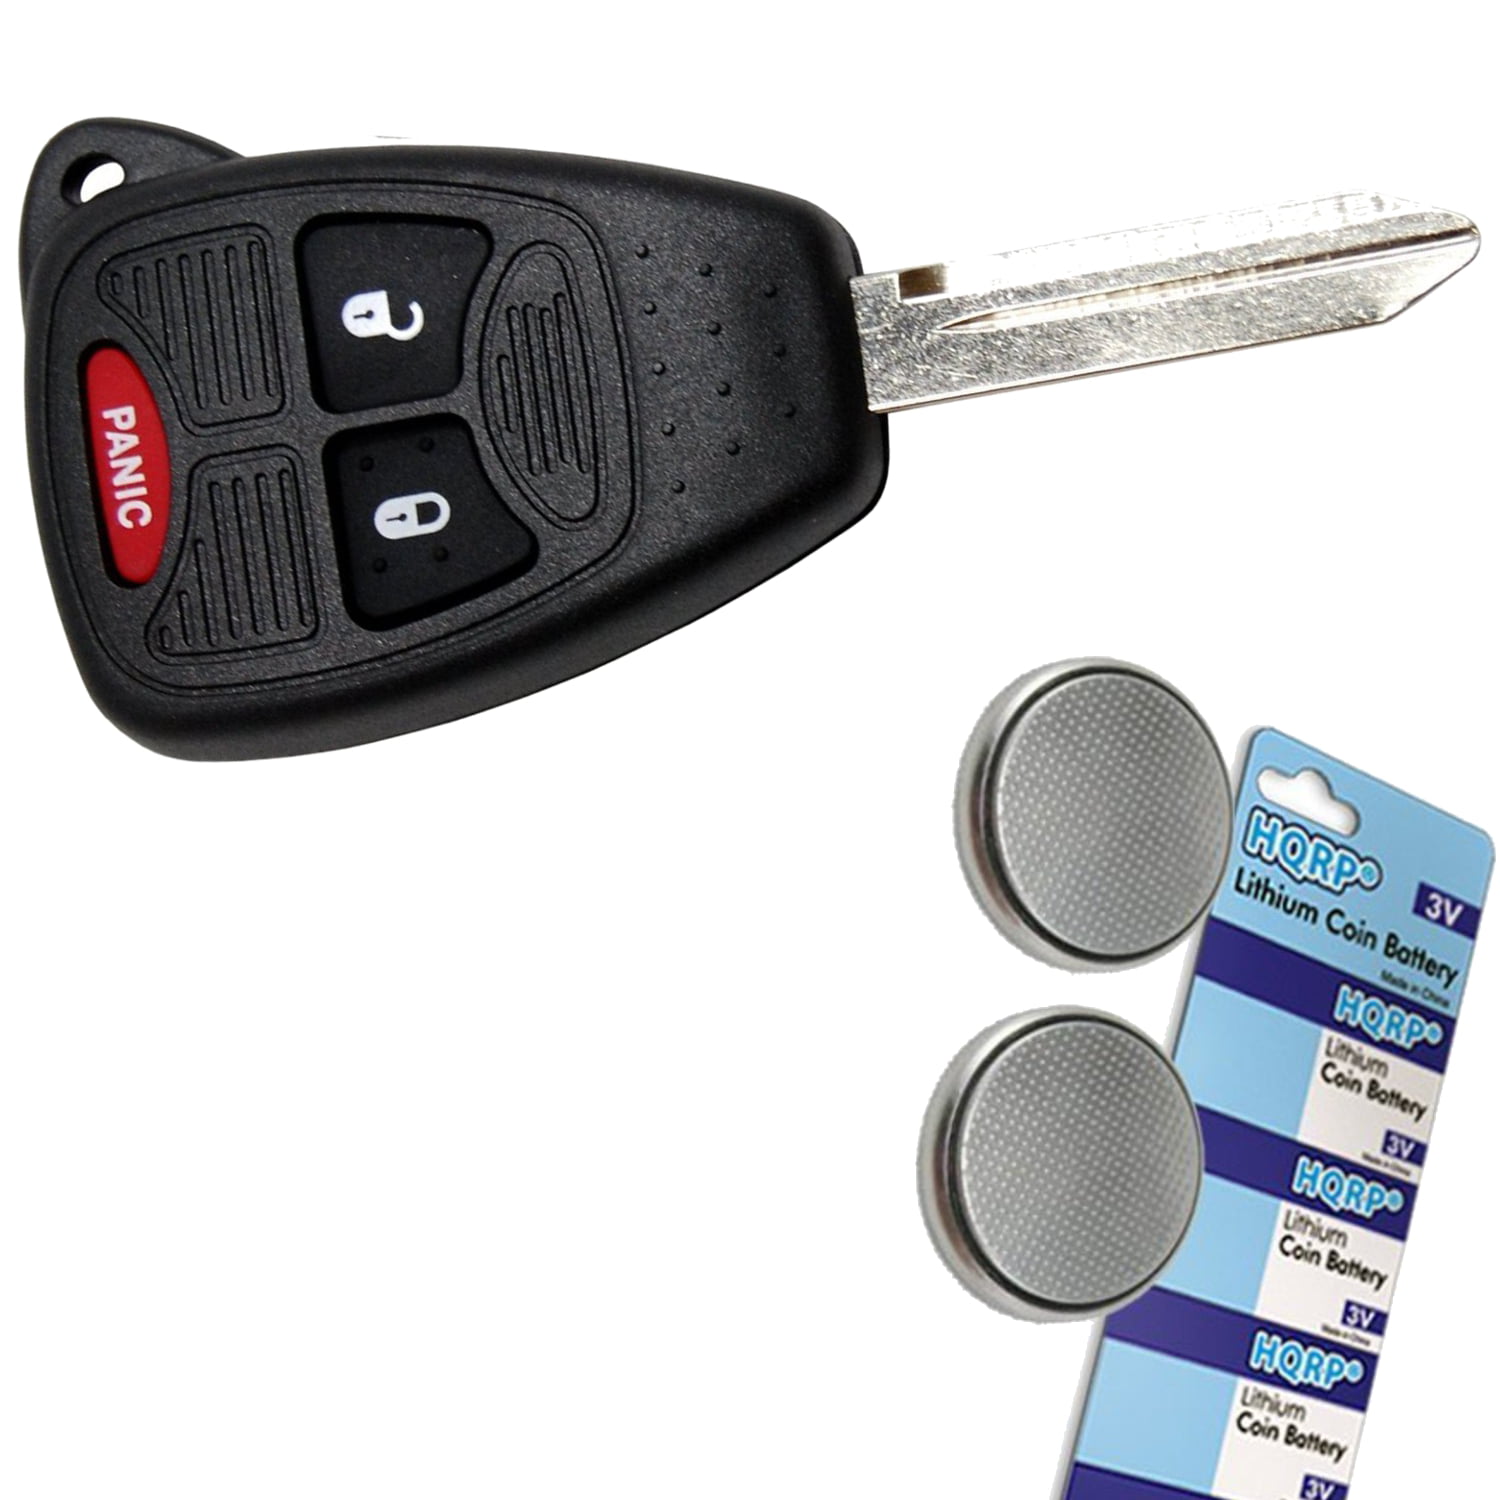 New Key Fob Remote Shell Case For a 2007 Jeep Compass w/ Remote Start 